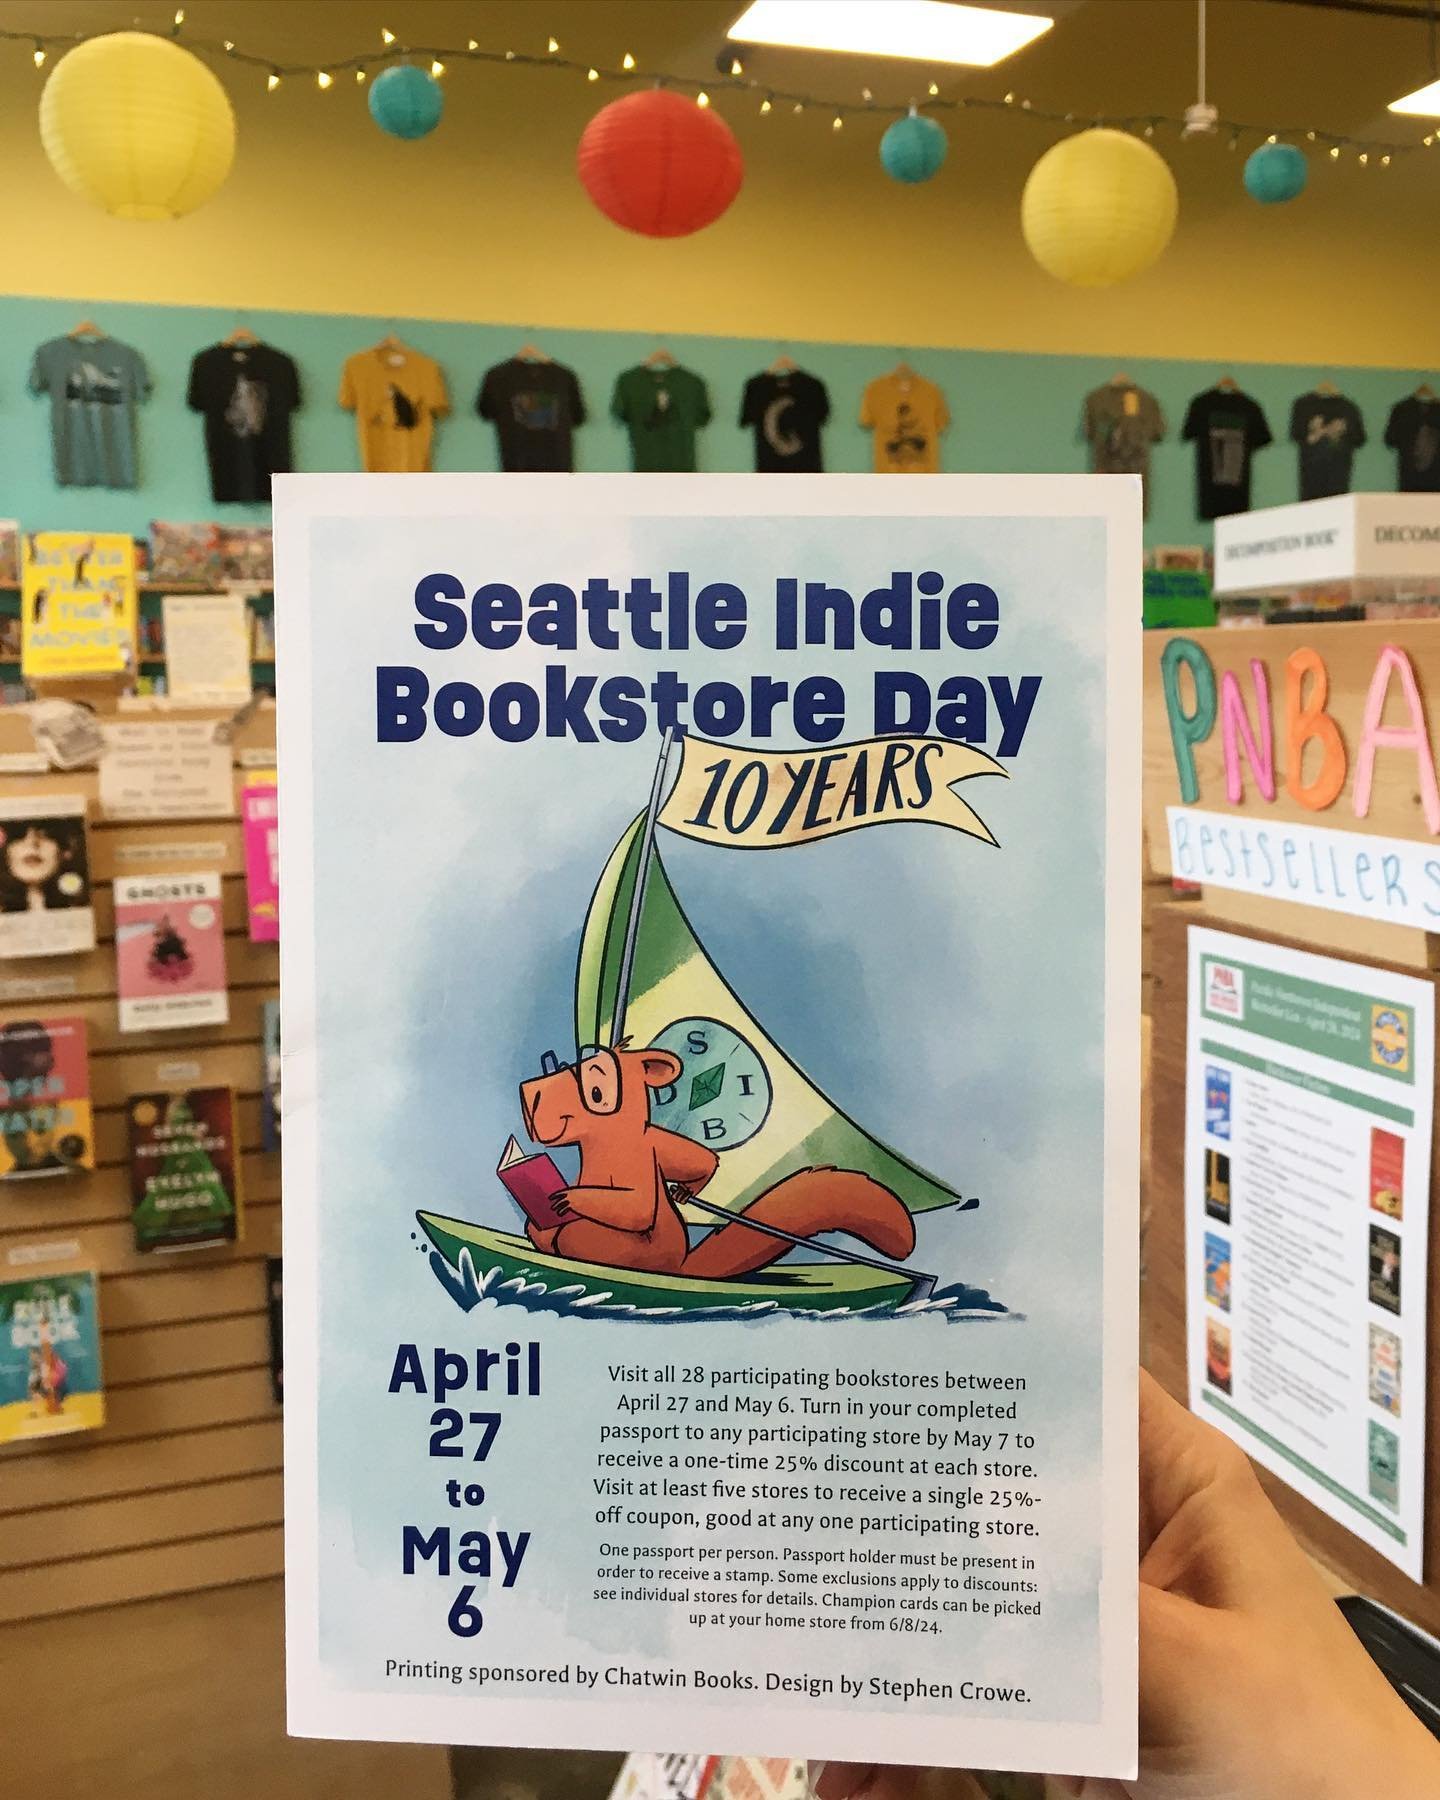 Thank you to everyone that joined us last Saturday for Indie Bookstore Day!! Just a reminder that you have until the 6th to finish up your passports! We&rsquo;re here and ready to give stamps this weekend 😁